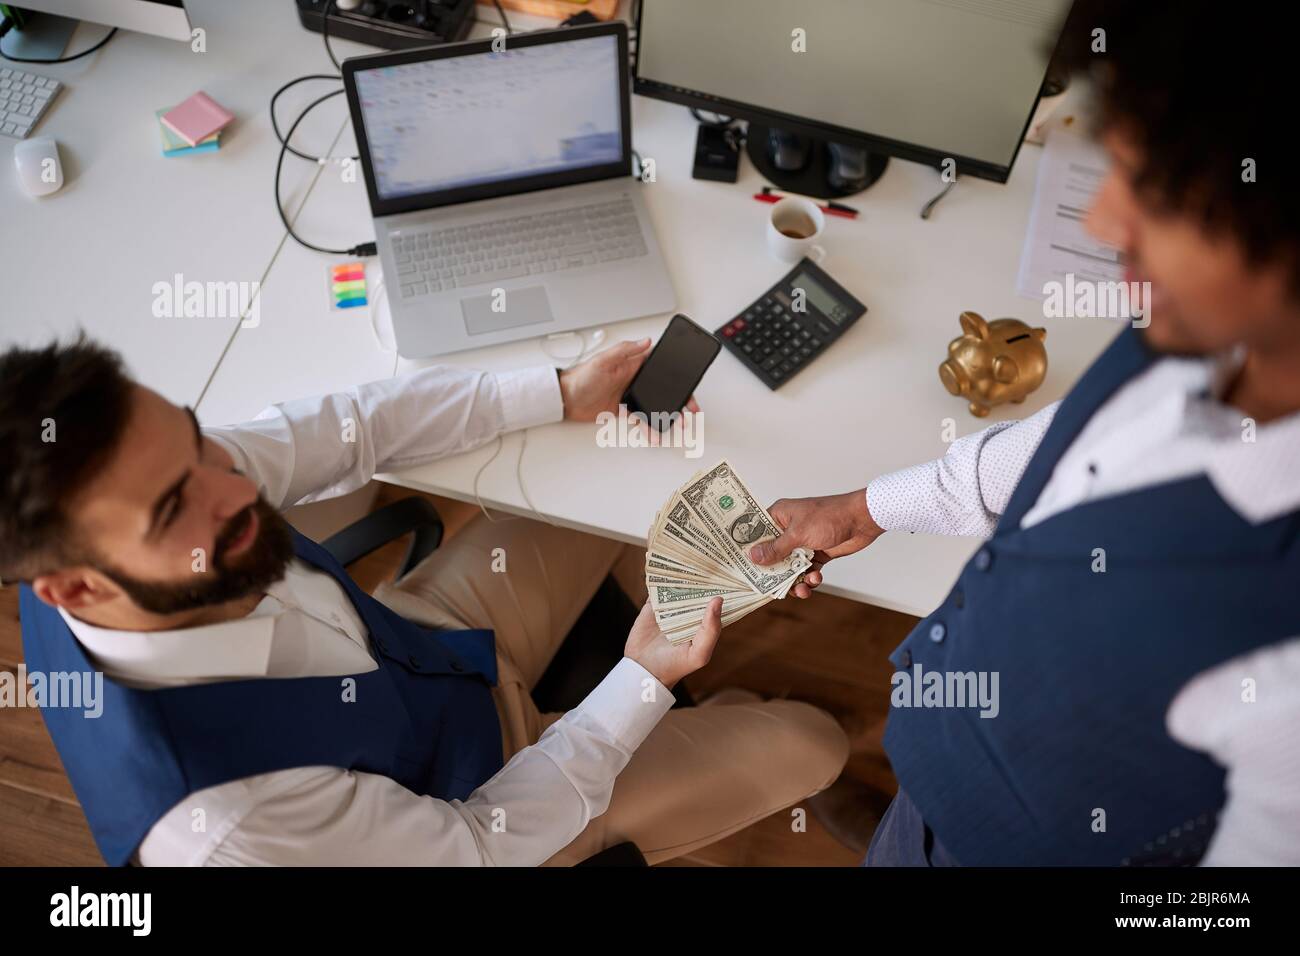 A business deal in the making, investing money, businesspeople concept Stock Photo